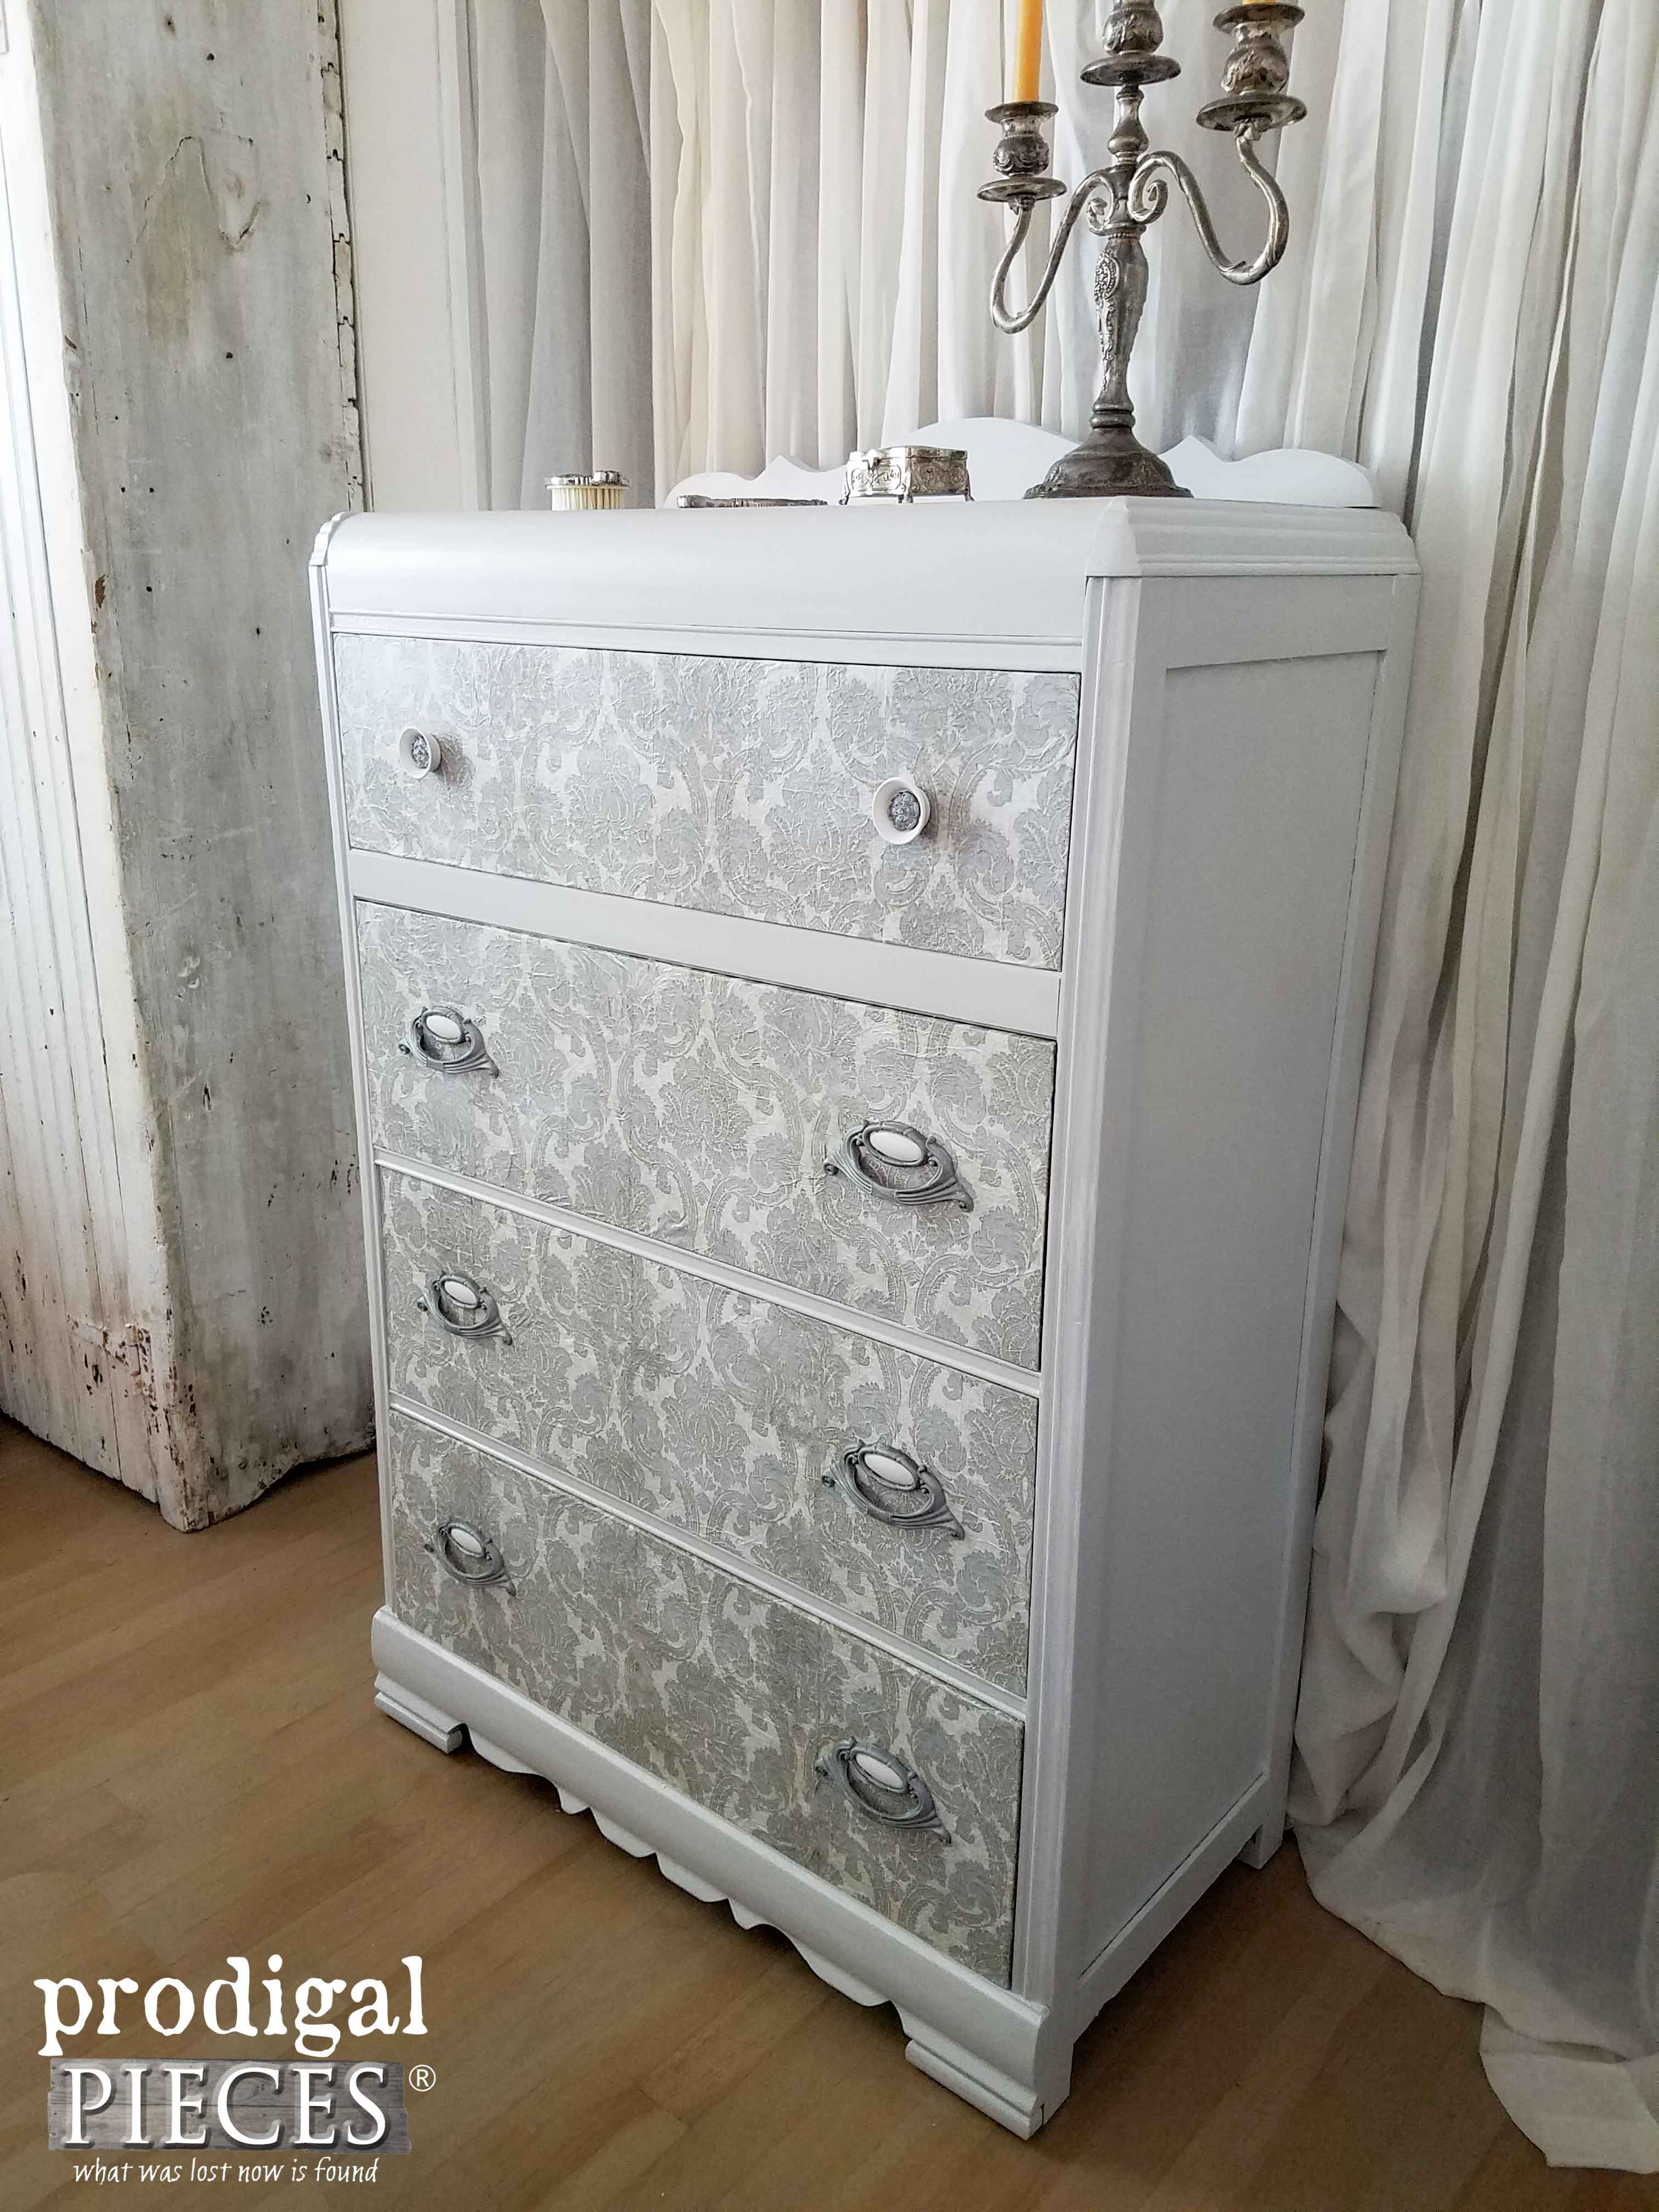 Antique Waterfall Chest of Drawers Made New with Decoupage Furniture by Prodigal Pieces | www.prodigalpieces.com